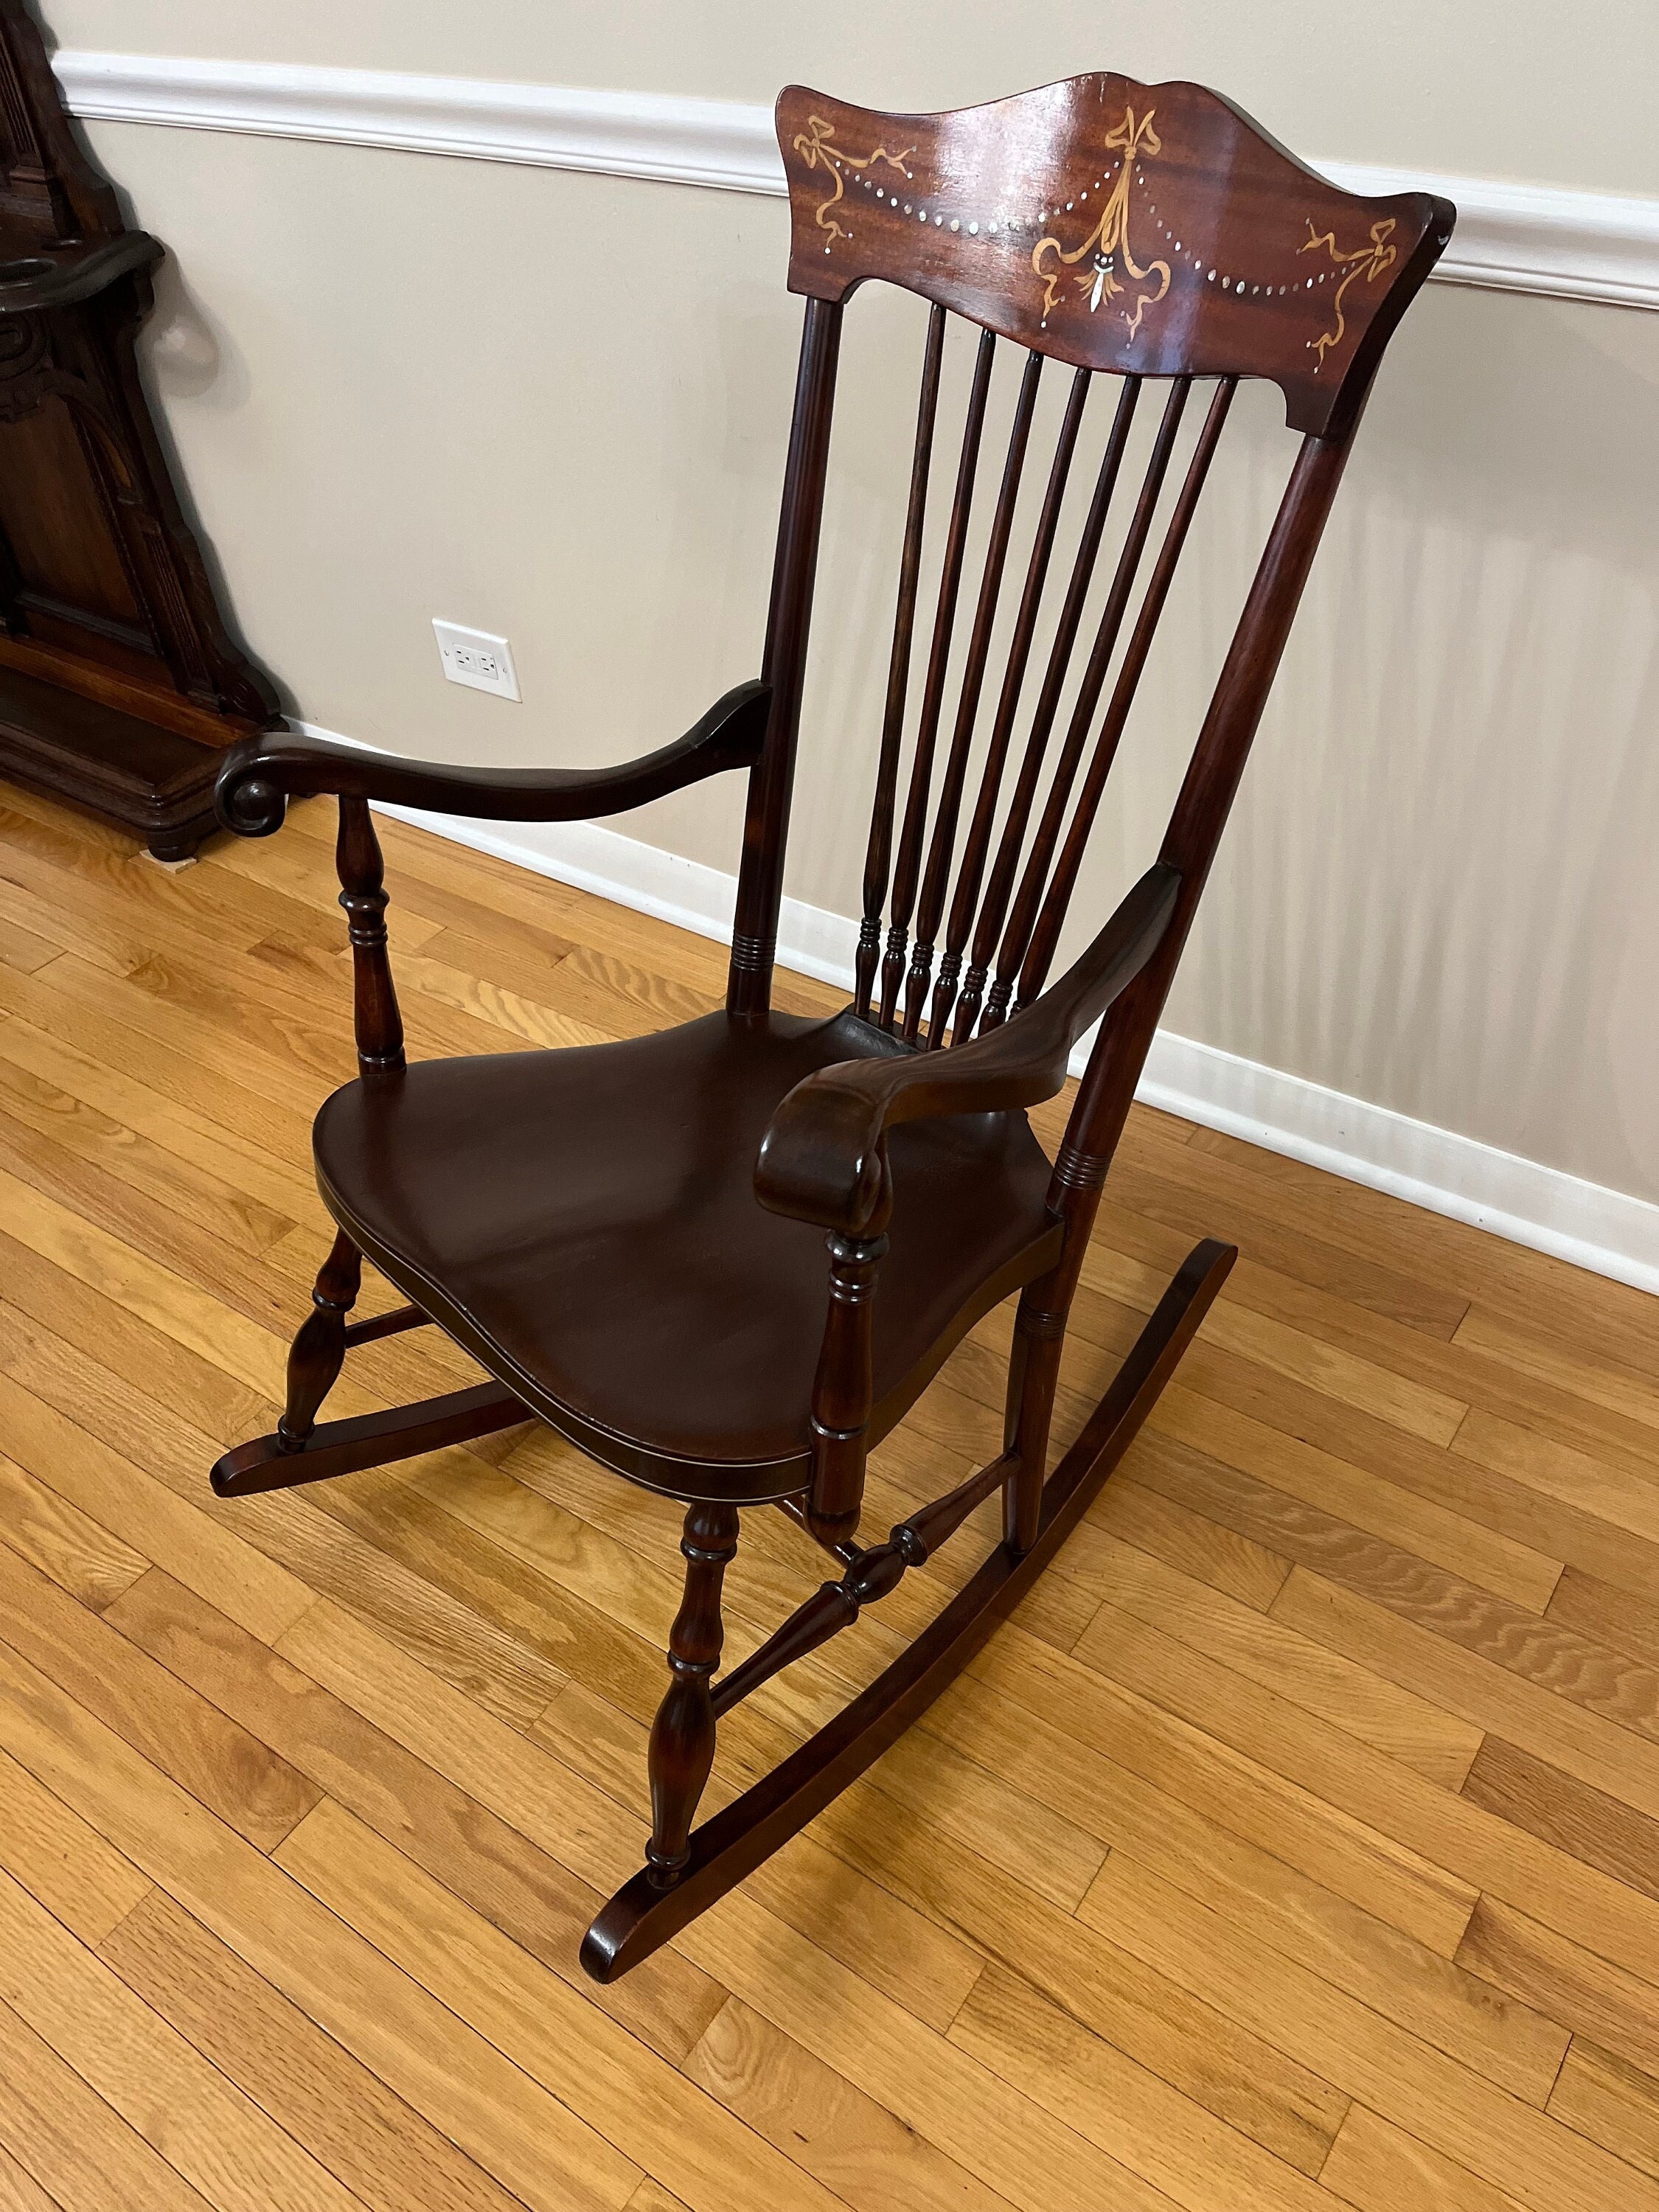 Wooden Rocking Chair Colonial and Traditional Super Comfortable Cushion  (Honey Finish)